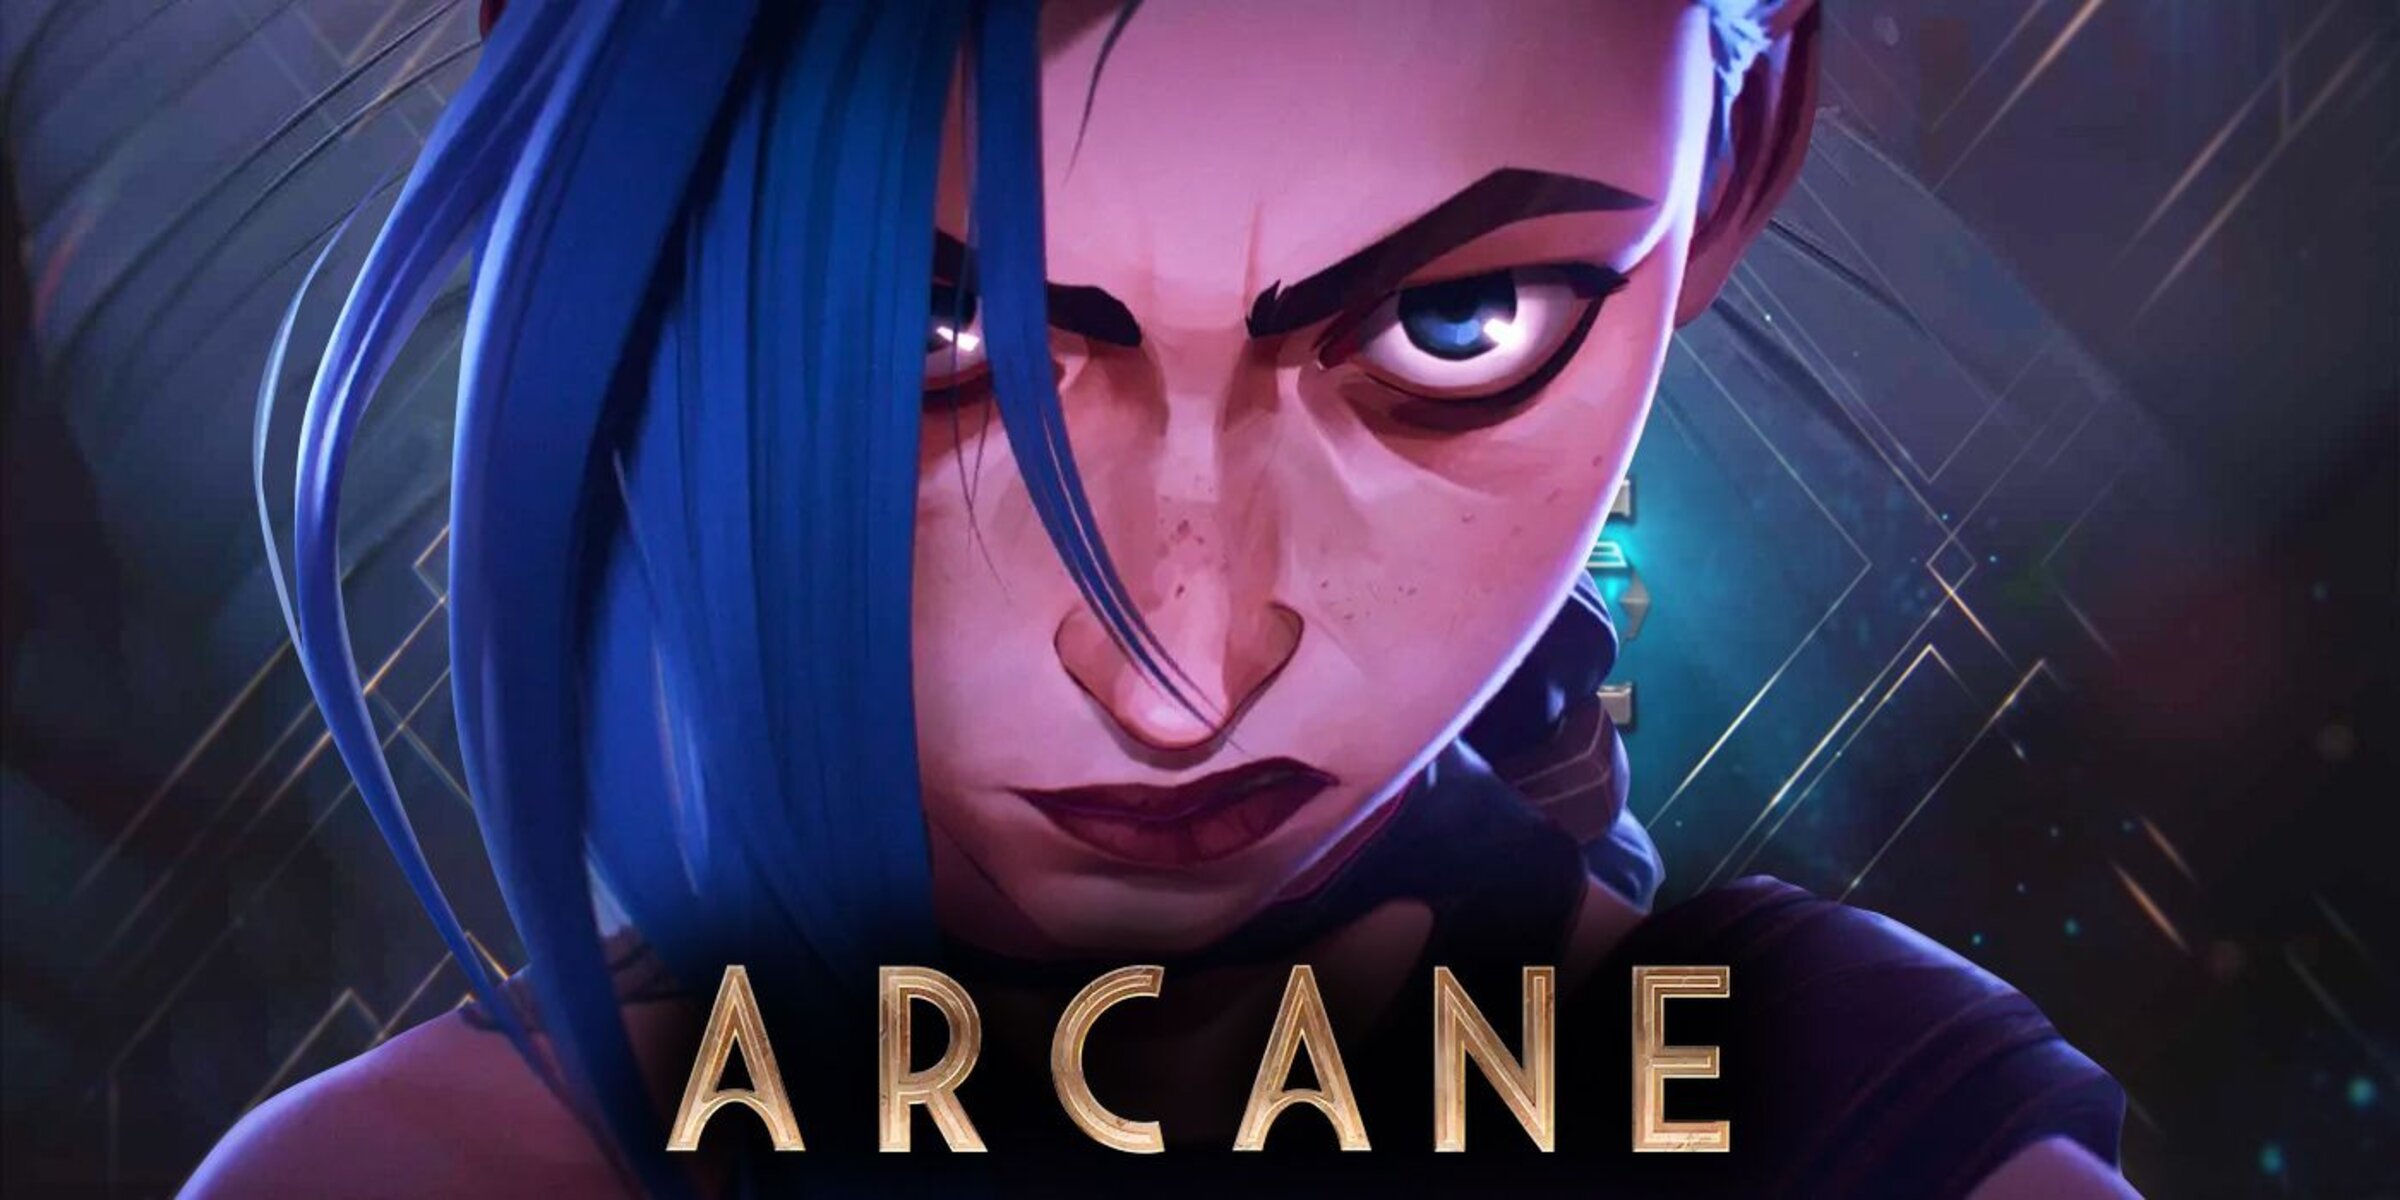 Critics and fans alike can't help but rave about 'Arcane' and its hypnotic animation and engaging storyline. See how you can watch the new series online.